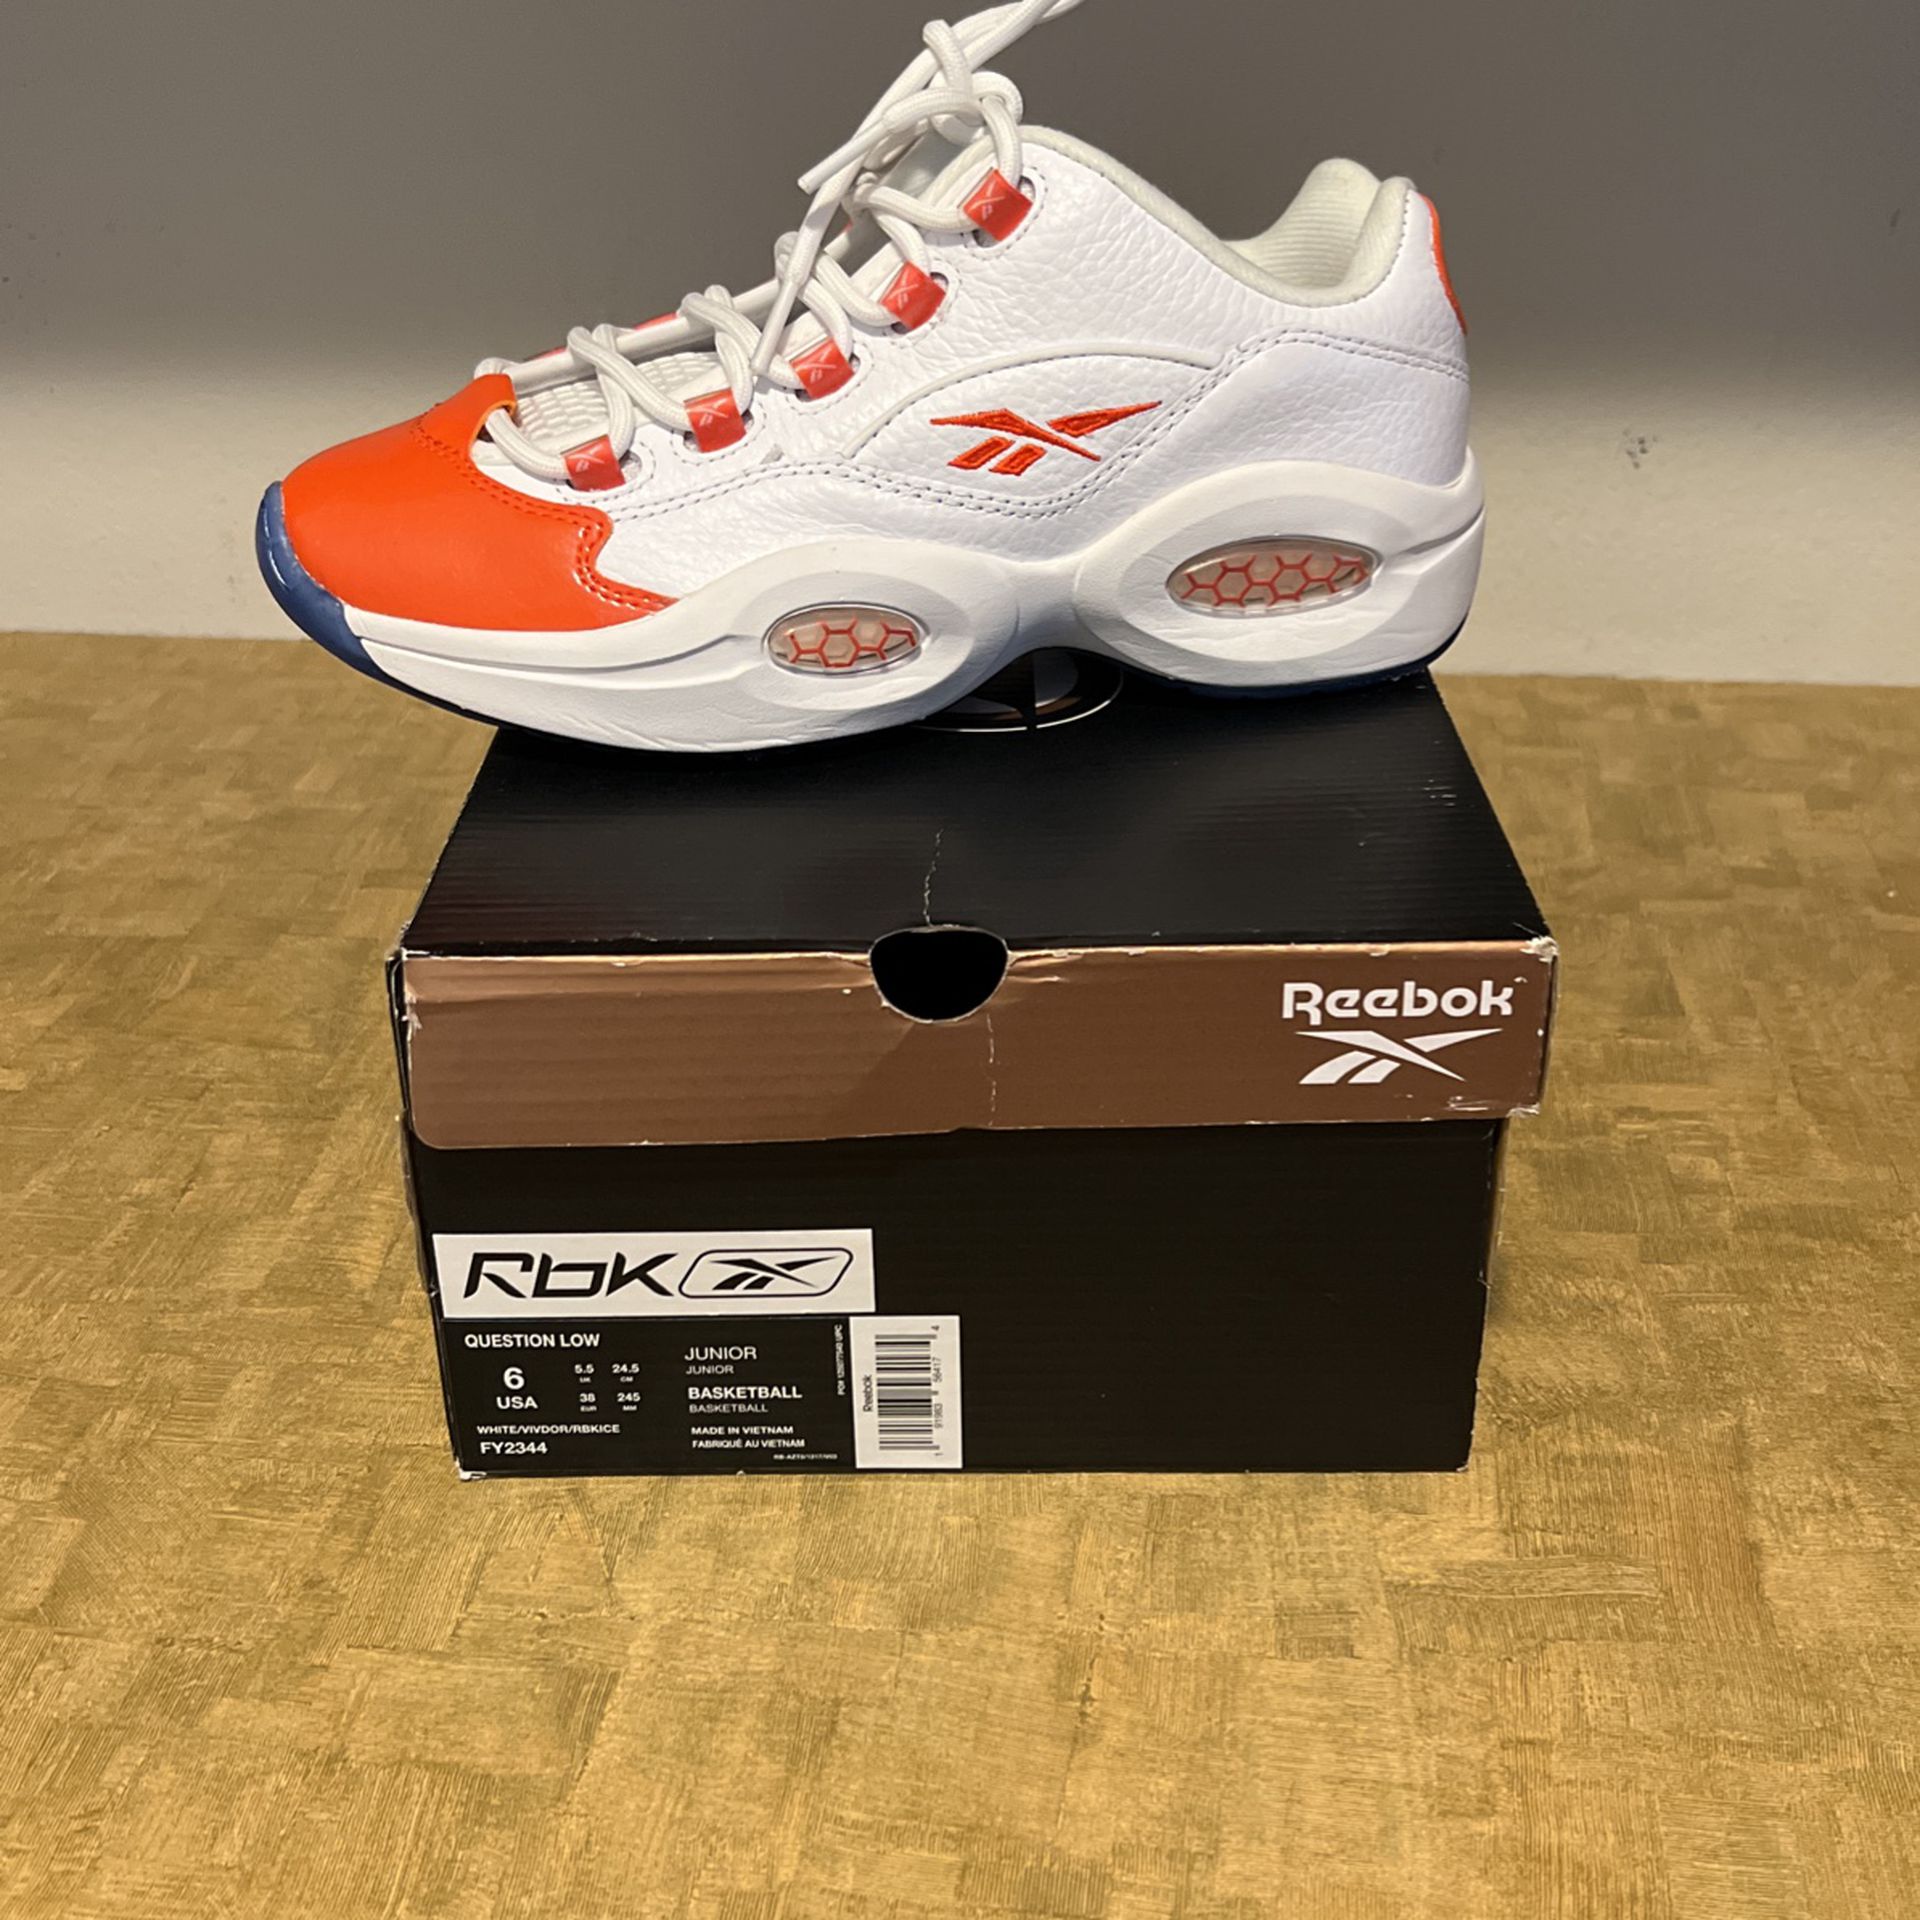 Reebok Question Low Iverson Basketball Shoes - Kids Youth GS Size 6Y (FY2344)